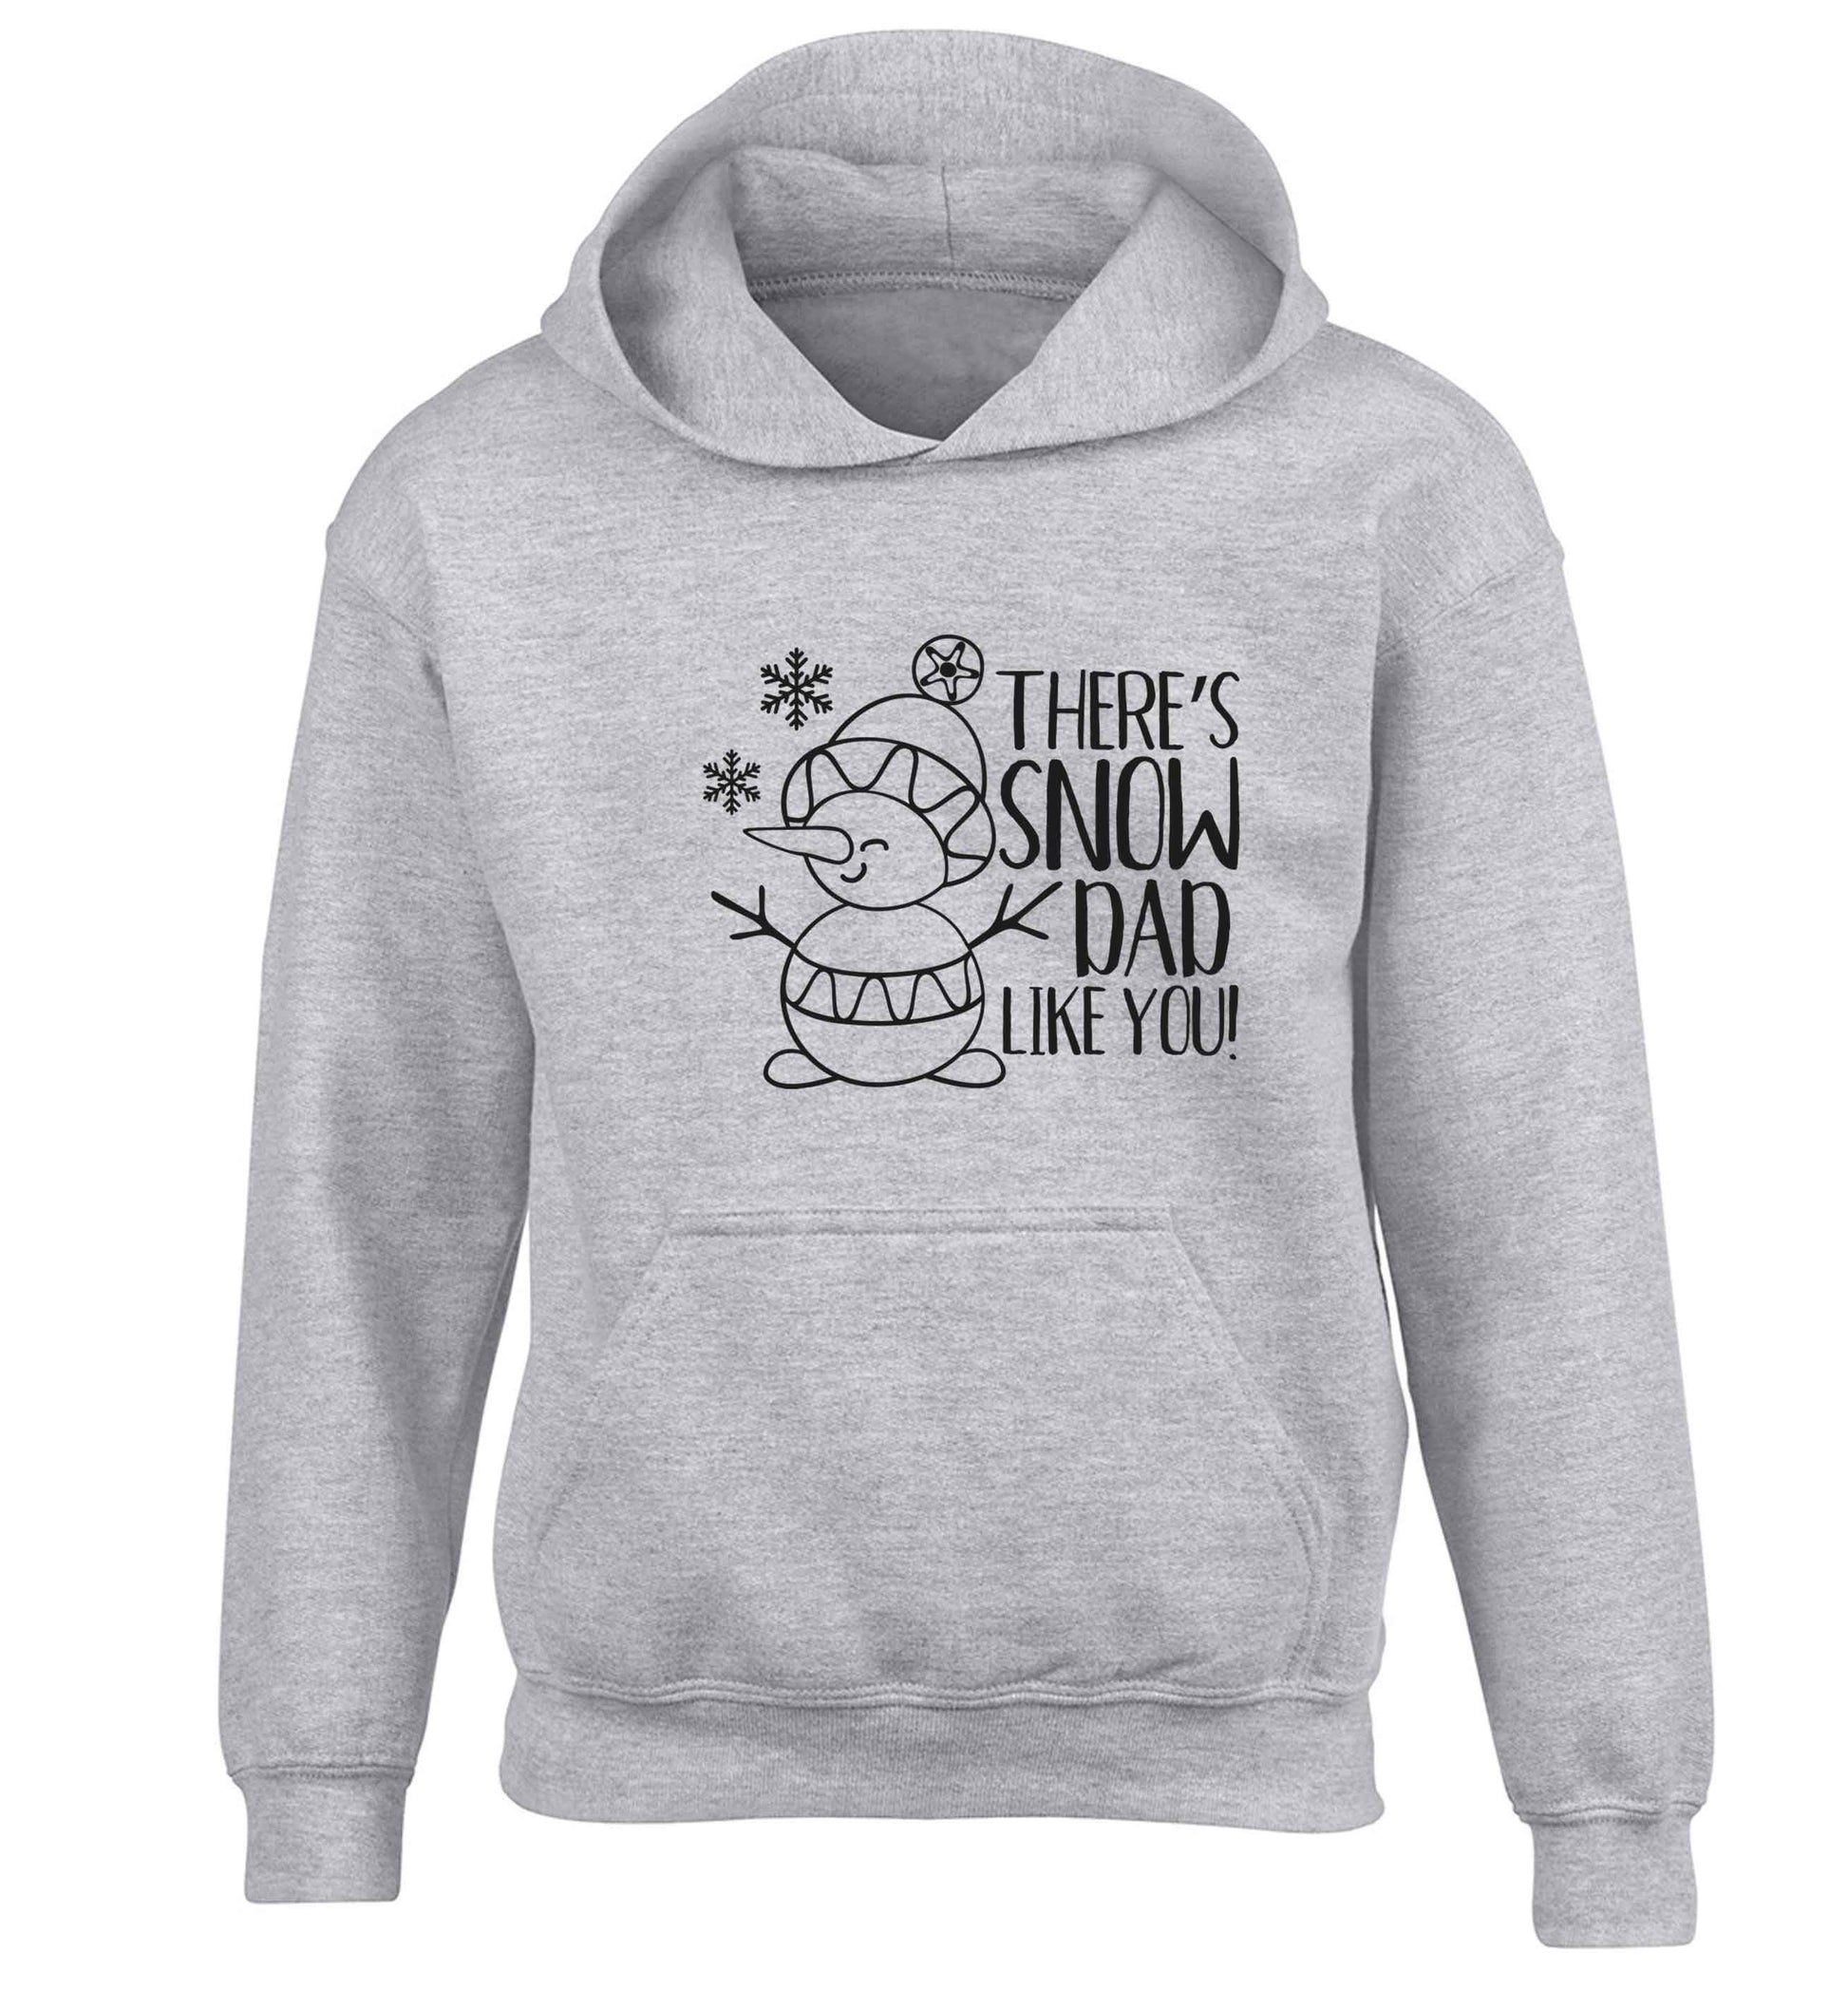 There's snow dad like you children's grey hoodie 12-13 Years